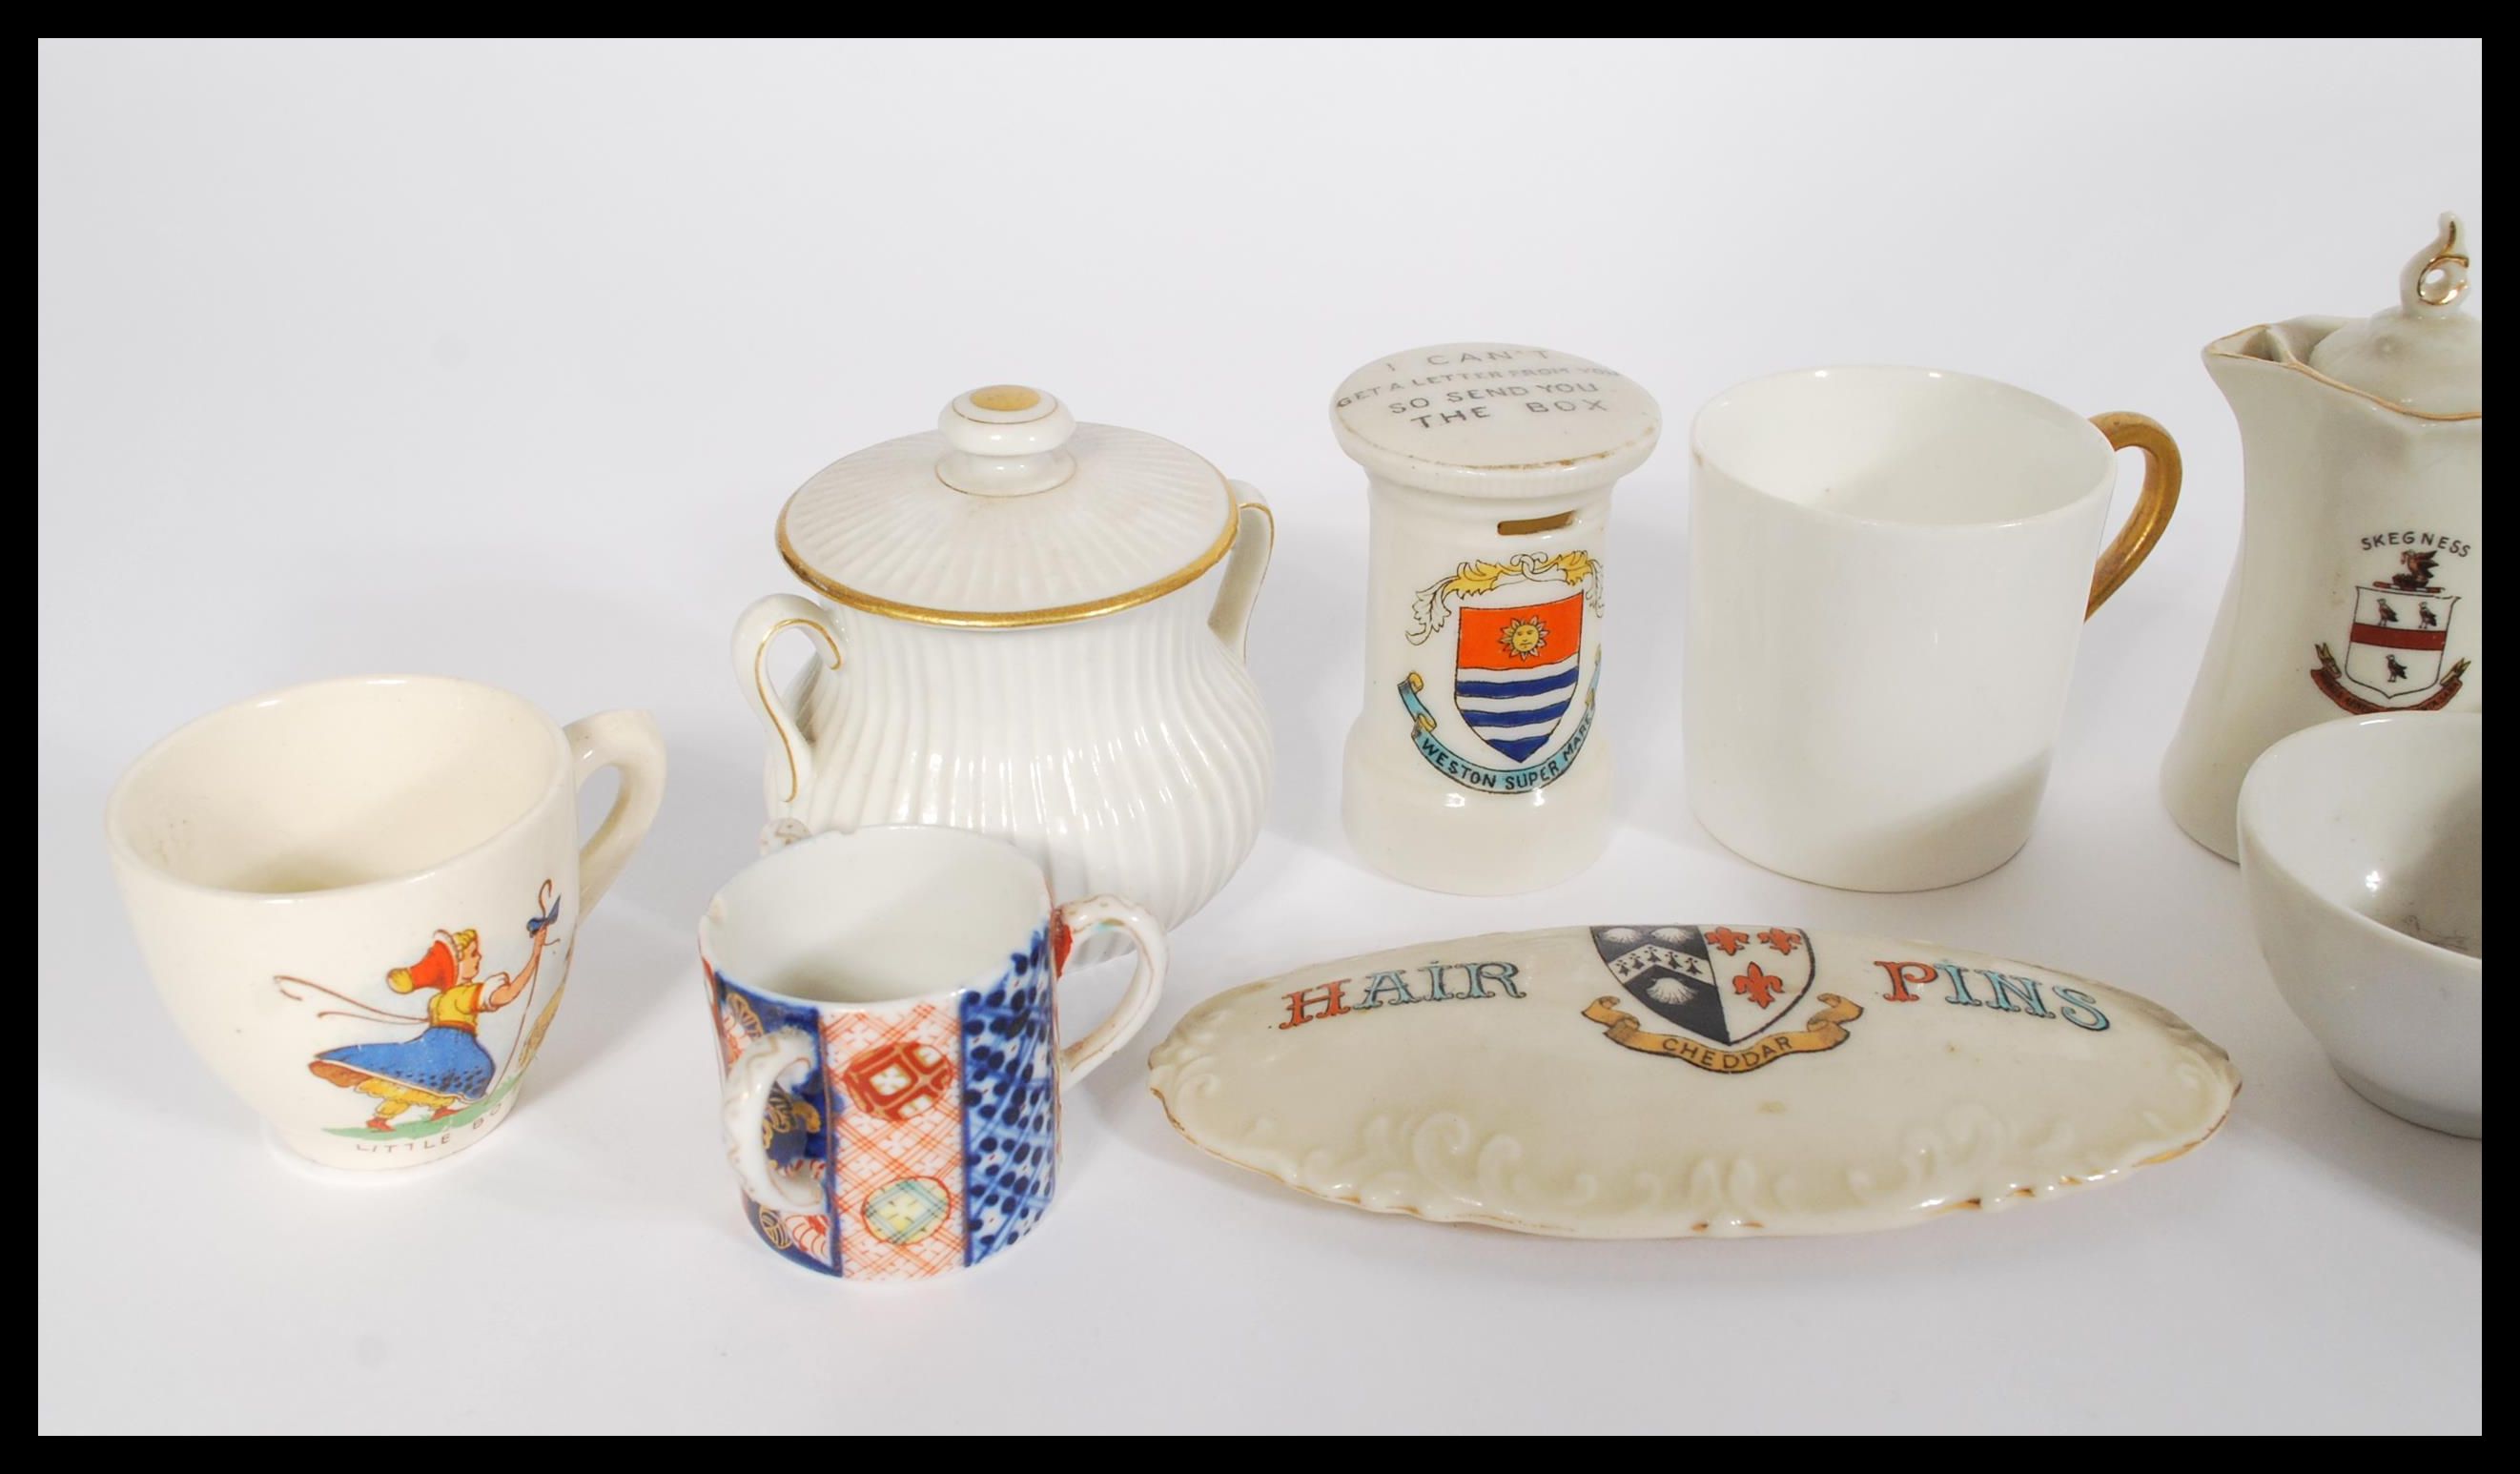 A collection of Goss souvenir ware ceramics to include teapot, mugs, post-box, coffee cans etc along - Image 2 of 4